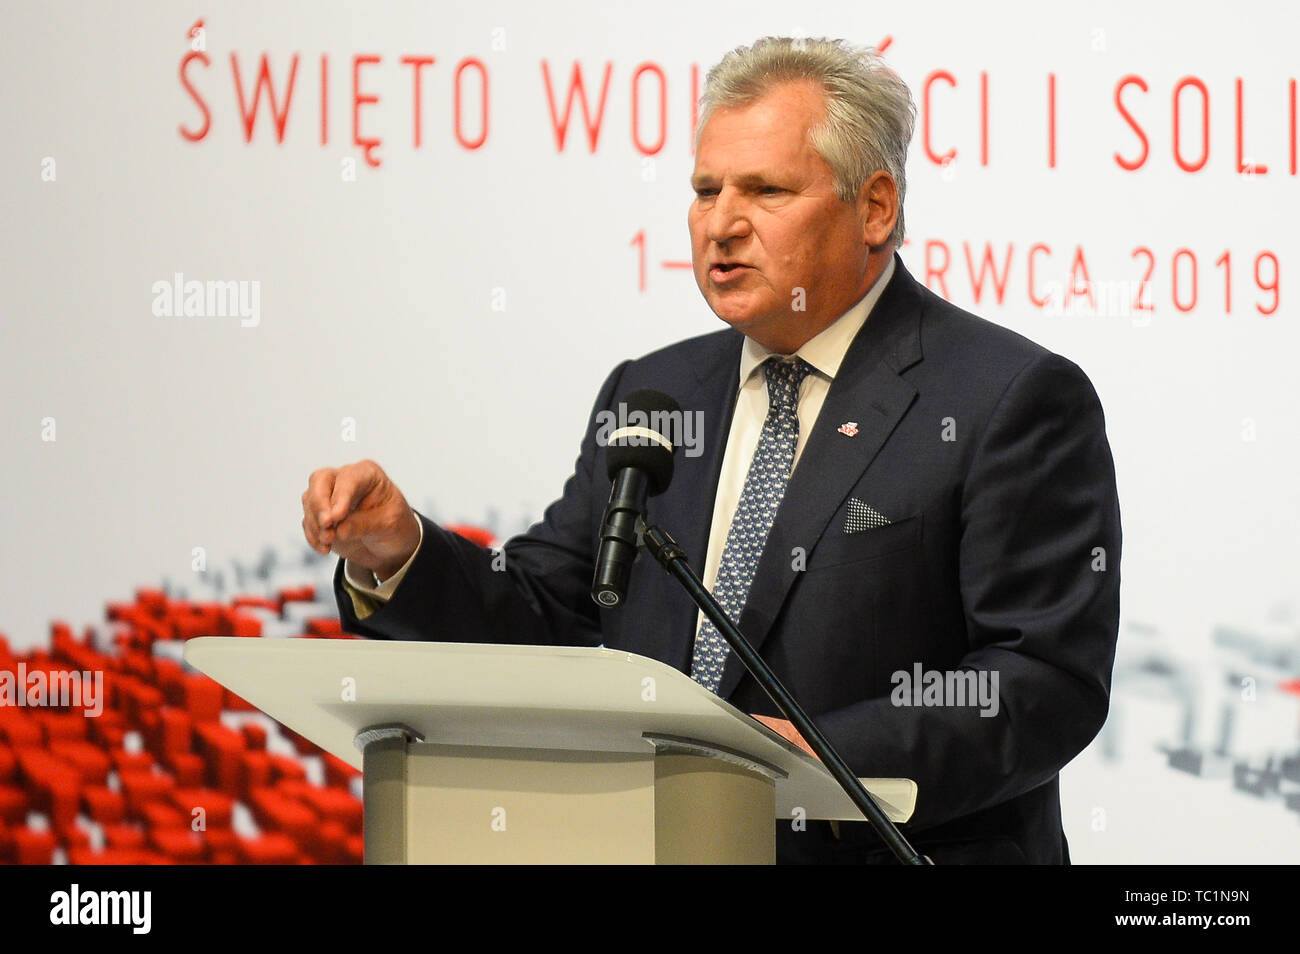 Former President of Poland, Aleksander Kwasniewski speaks about 30 years of Polish democracy on Freedom and Democracy days in Gdansk. Gdansk, in the 1980s became the birthplace of the Solidarity movement, which brought an end to Communism in Poland and played a huge part to end the Soviet Union. On June 04, 1989, the first free elections in the country took place since 1928, and the first since the communist era. Stock Photo